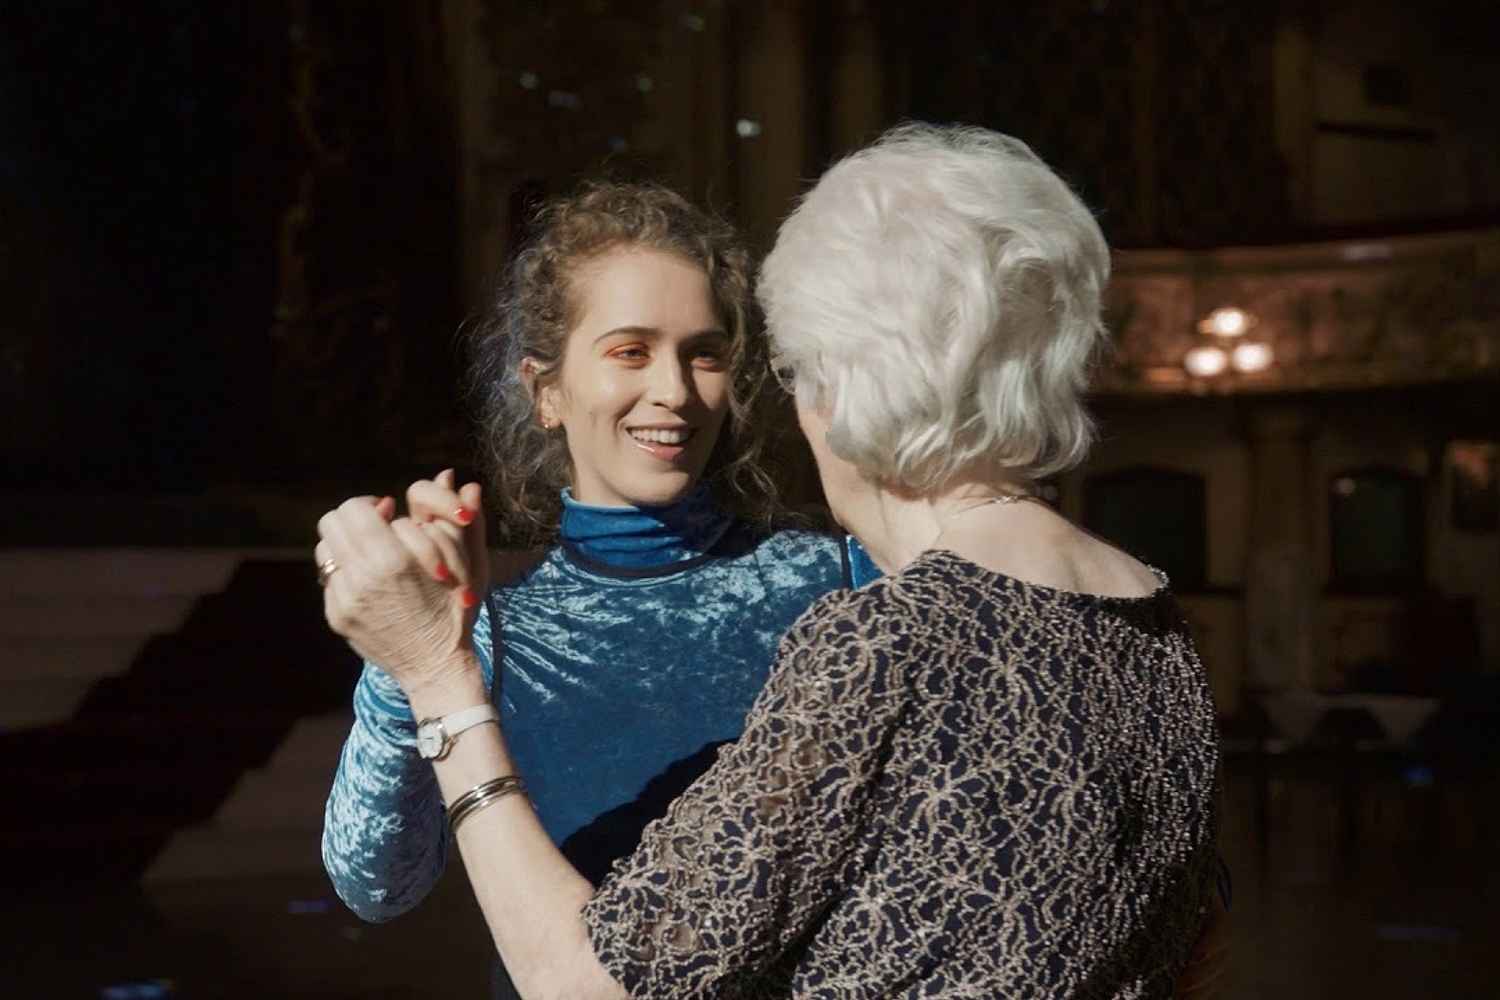 Rae Morris hits the ballroom in 'Dancing With Character' video